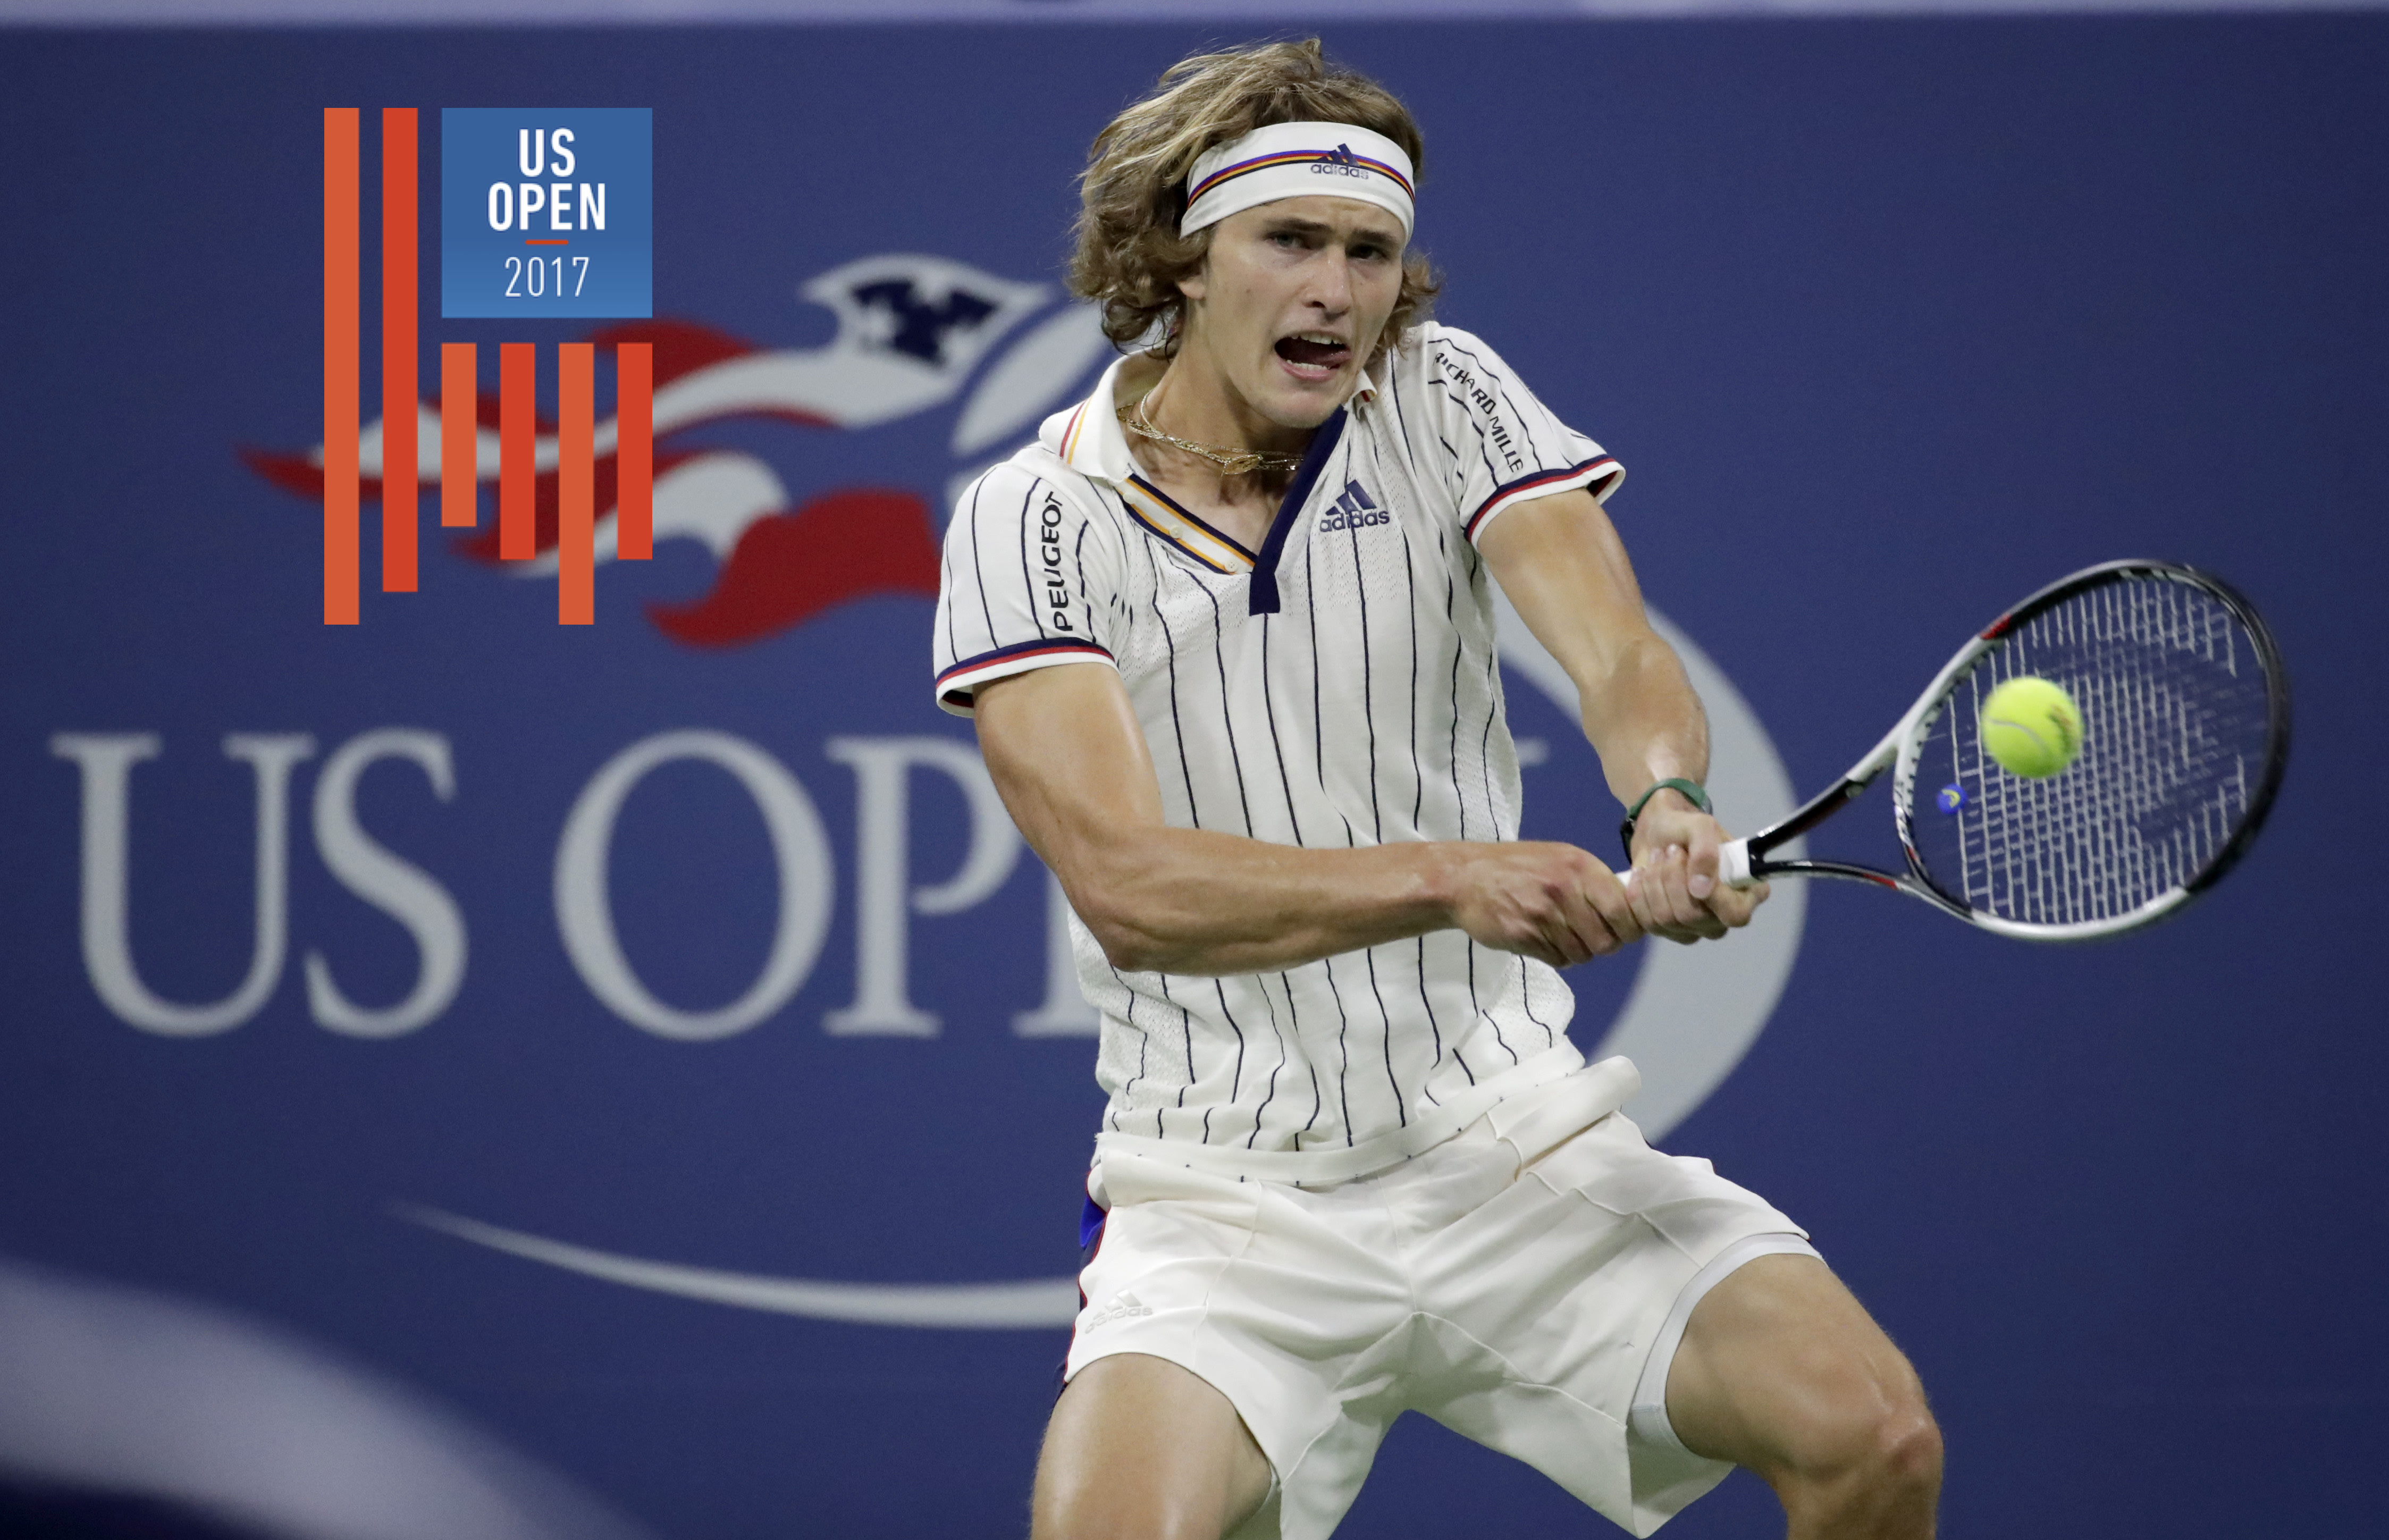 Zverev isnt the first talented player to disappoint early at majors